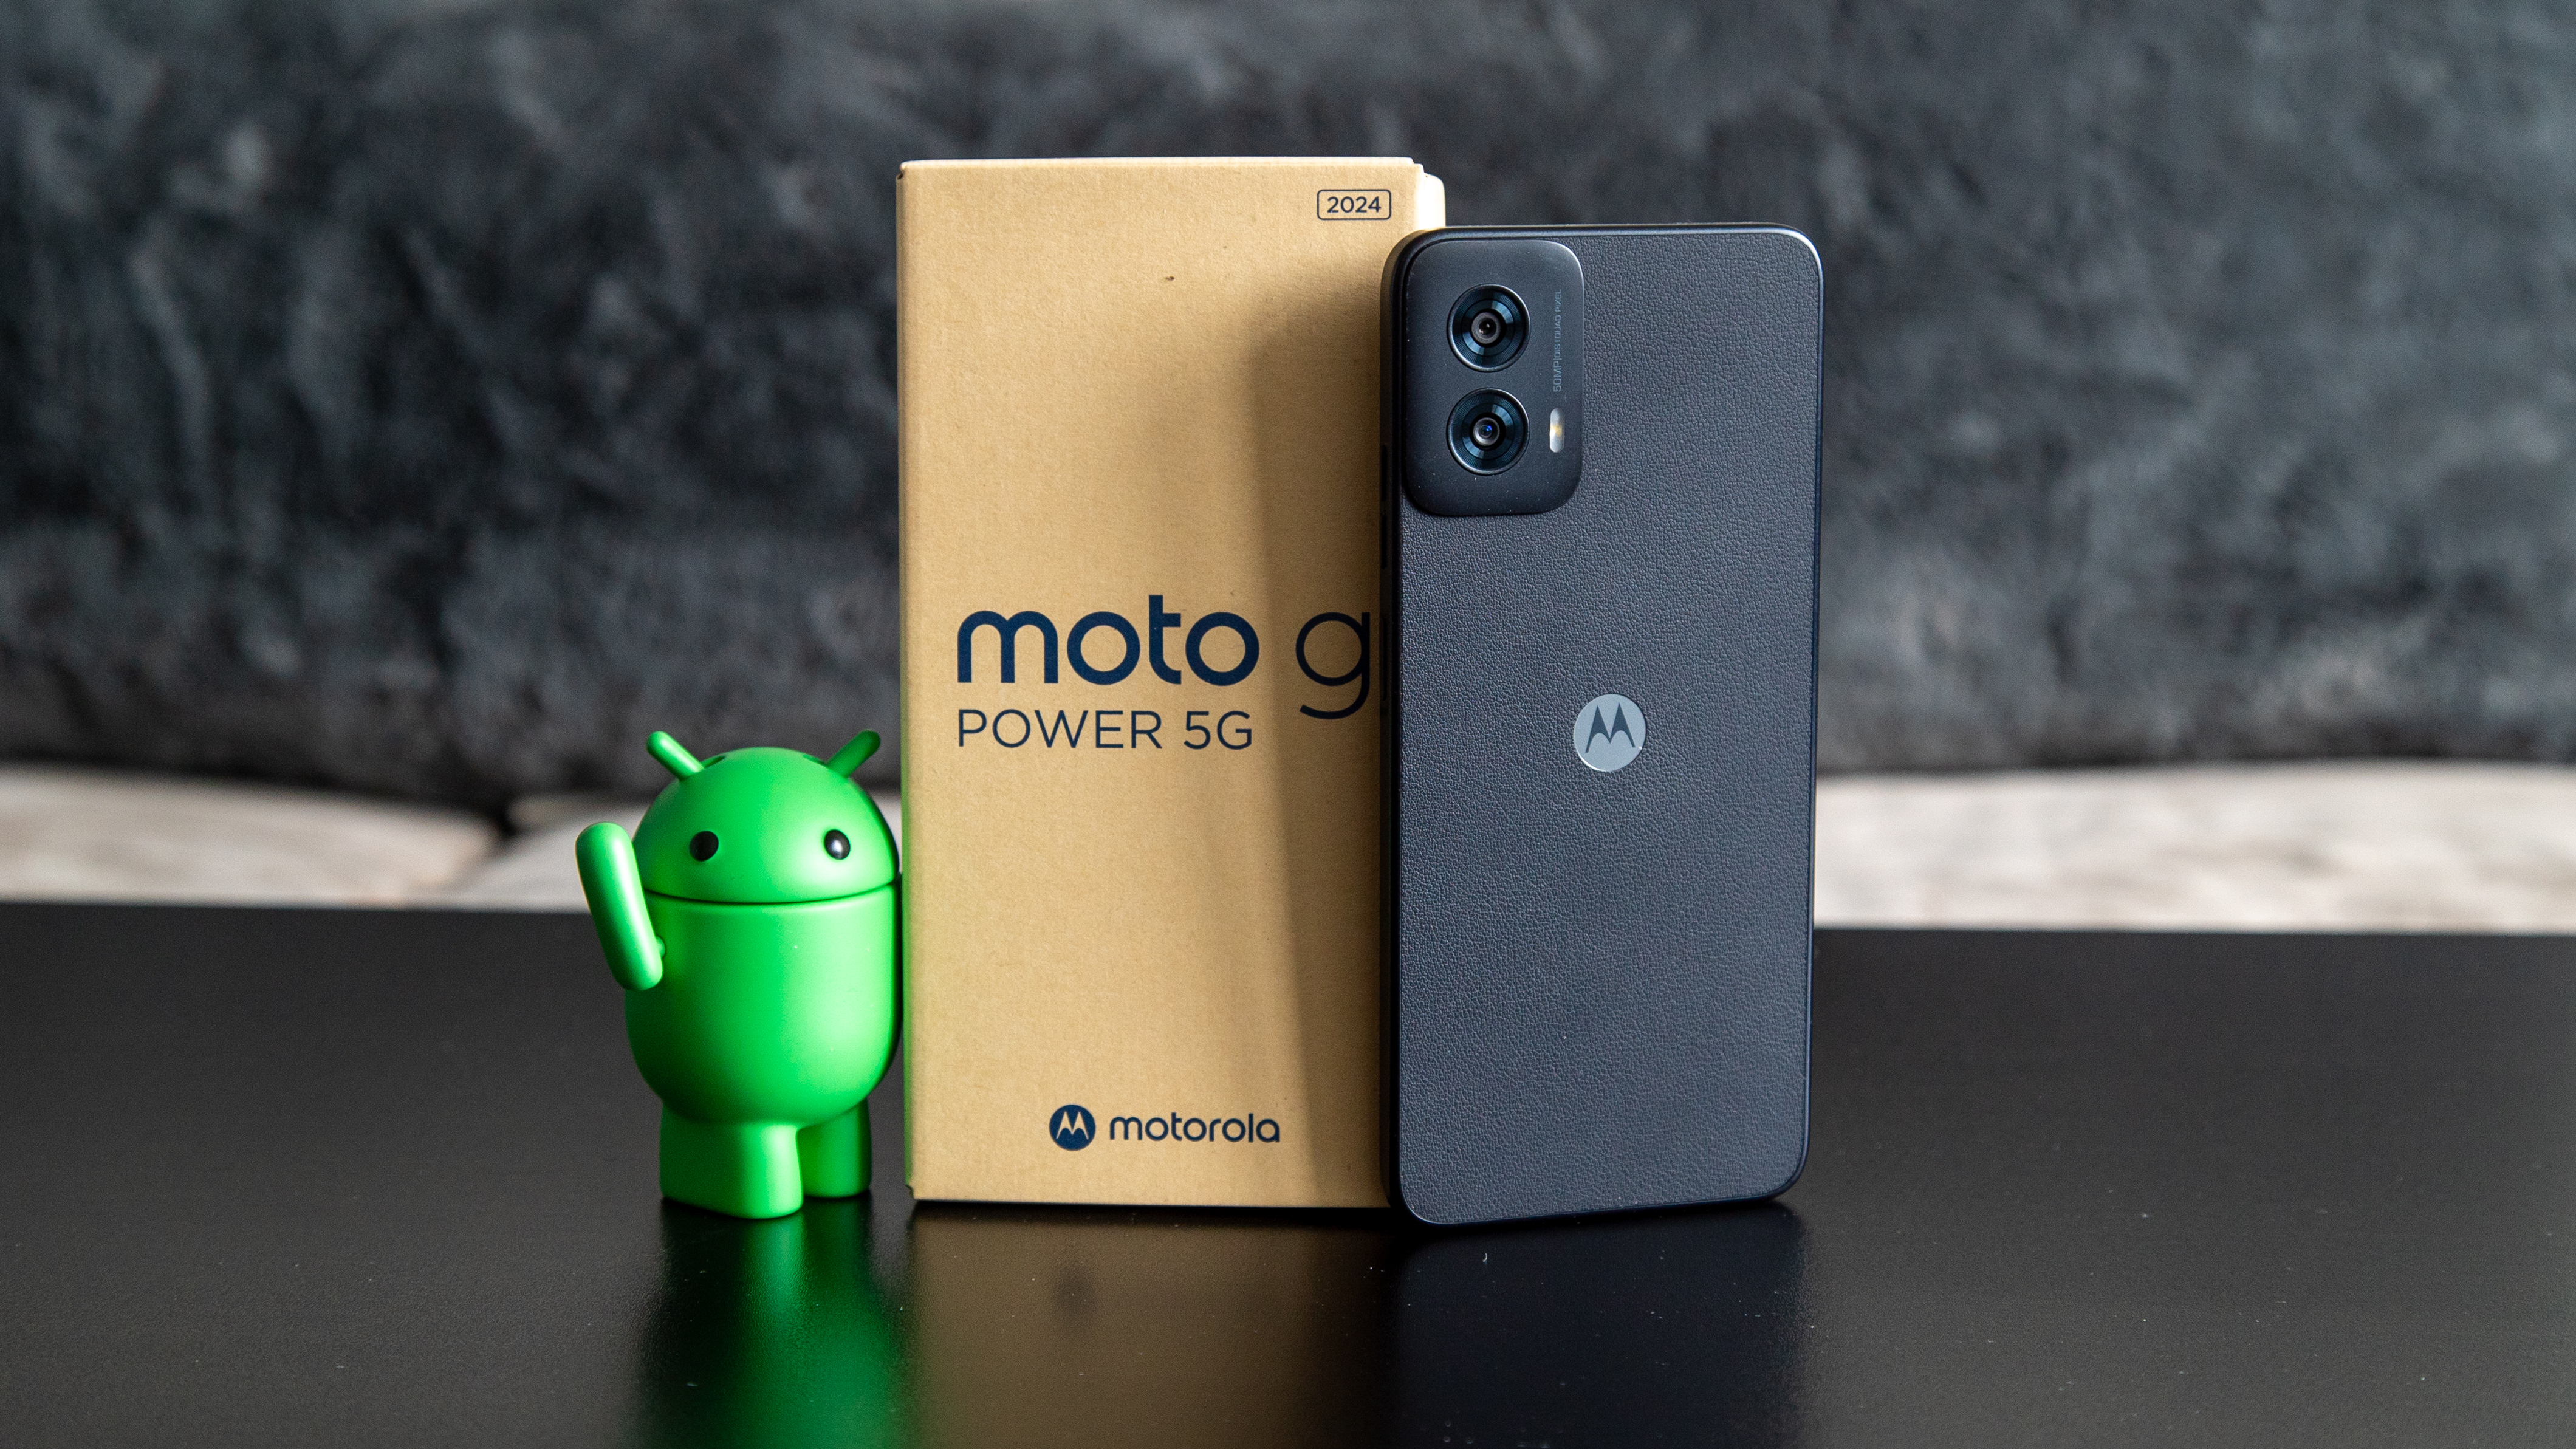 The Moto G Power 5G 2024 retail box with Google's "The Bot" figurine